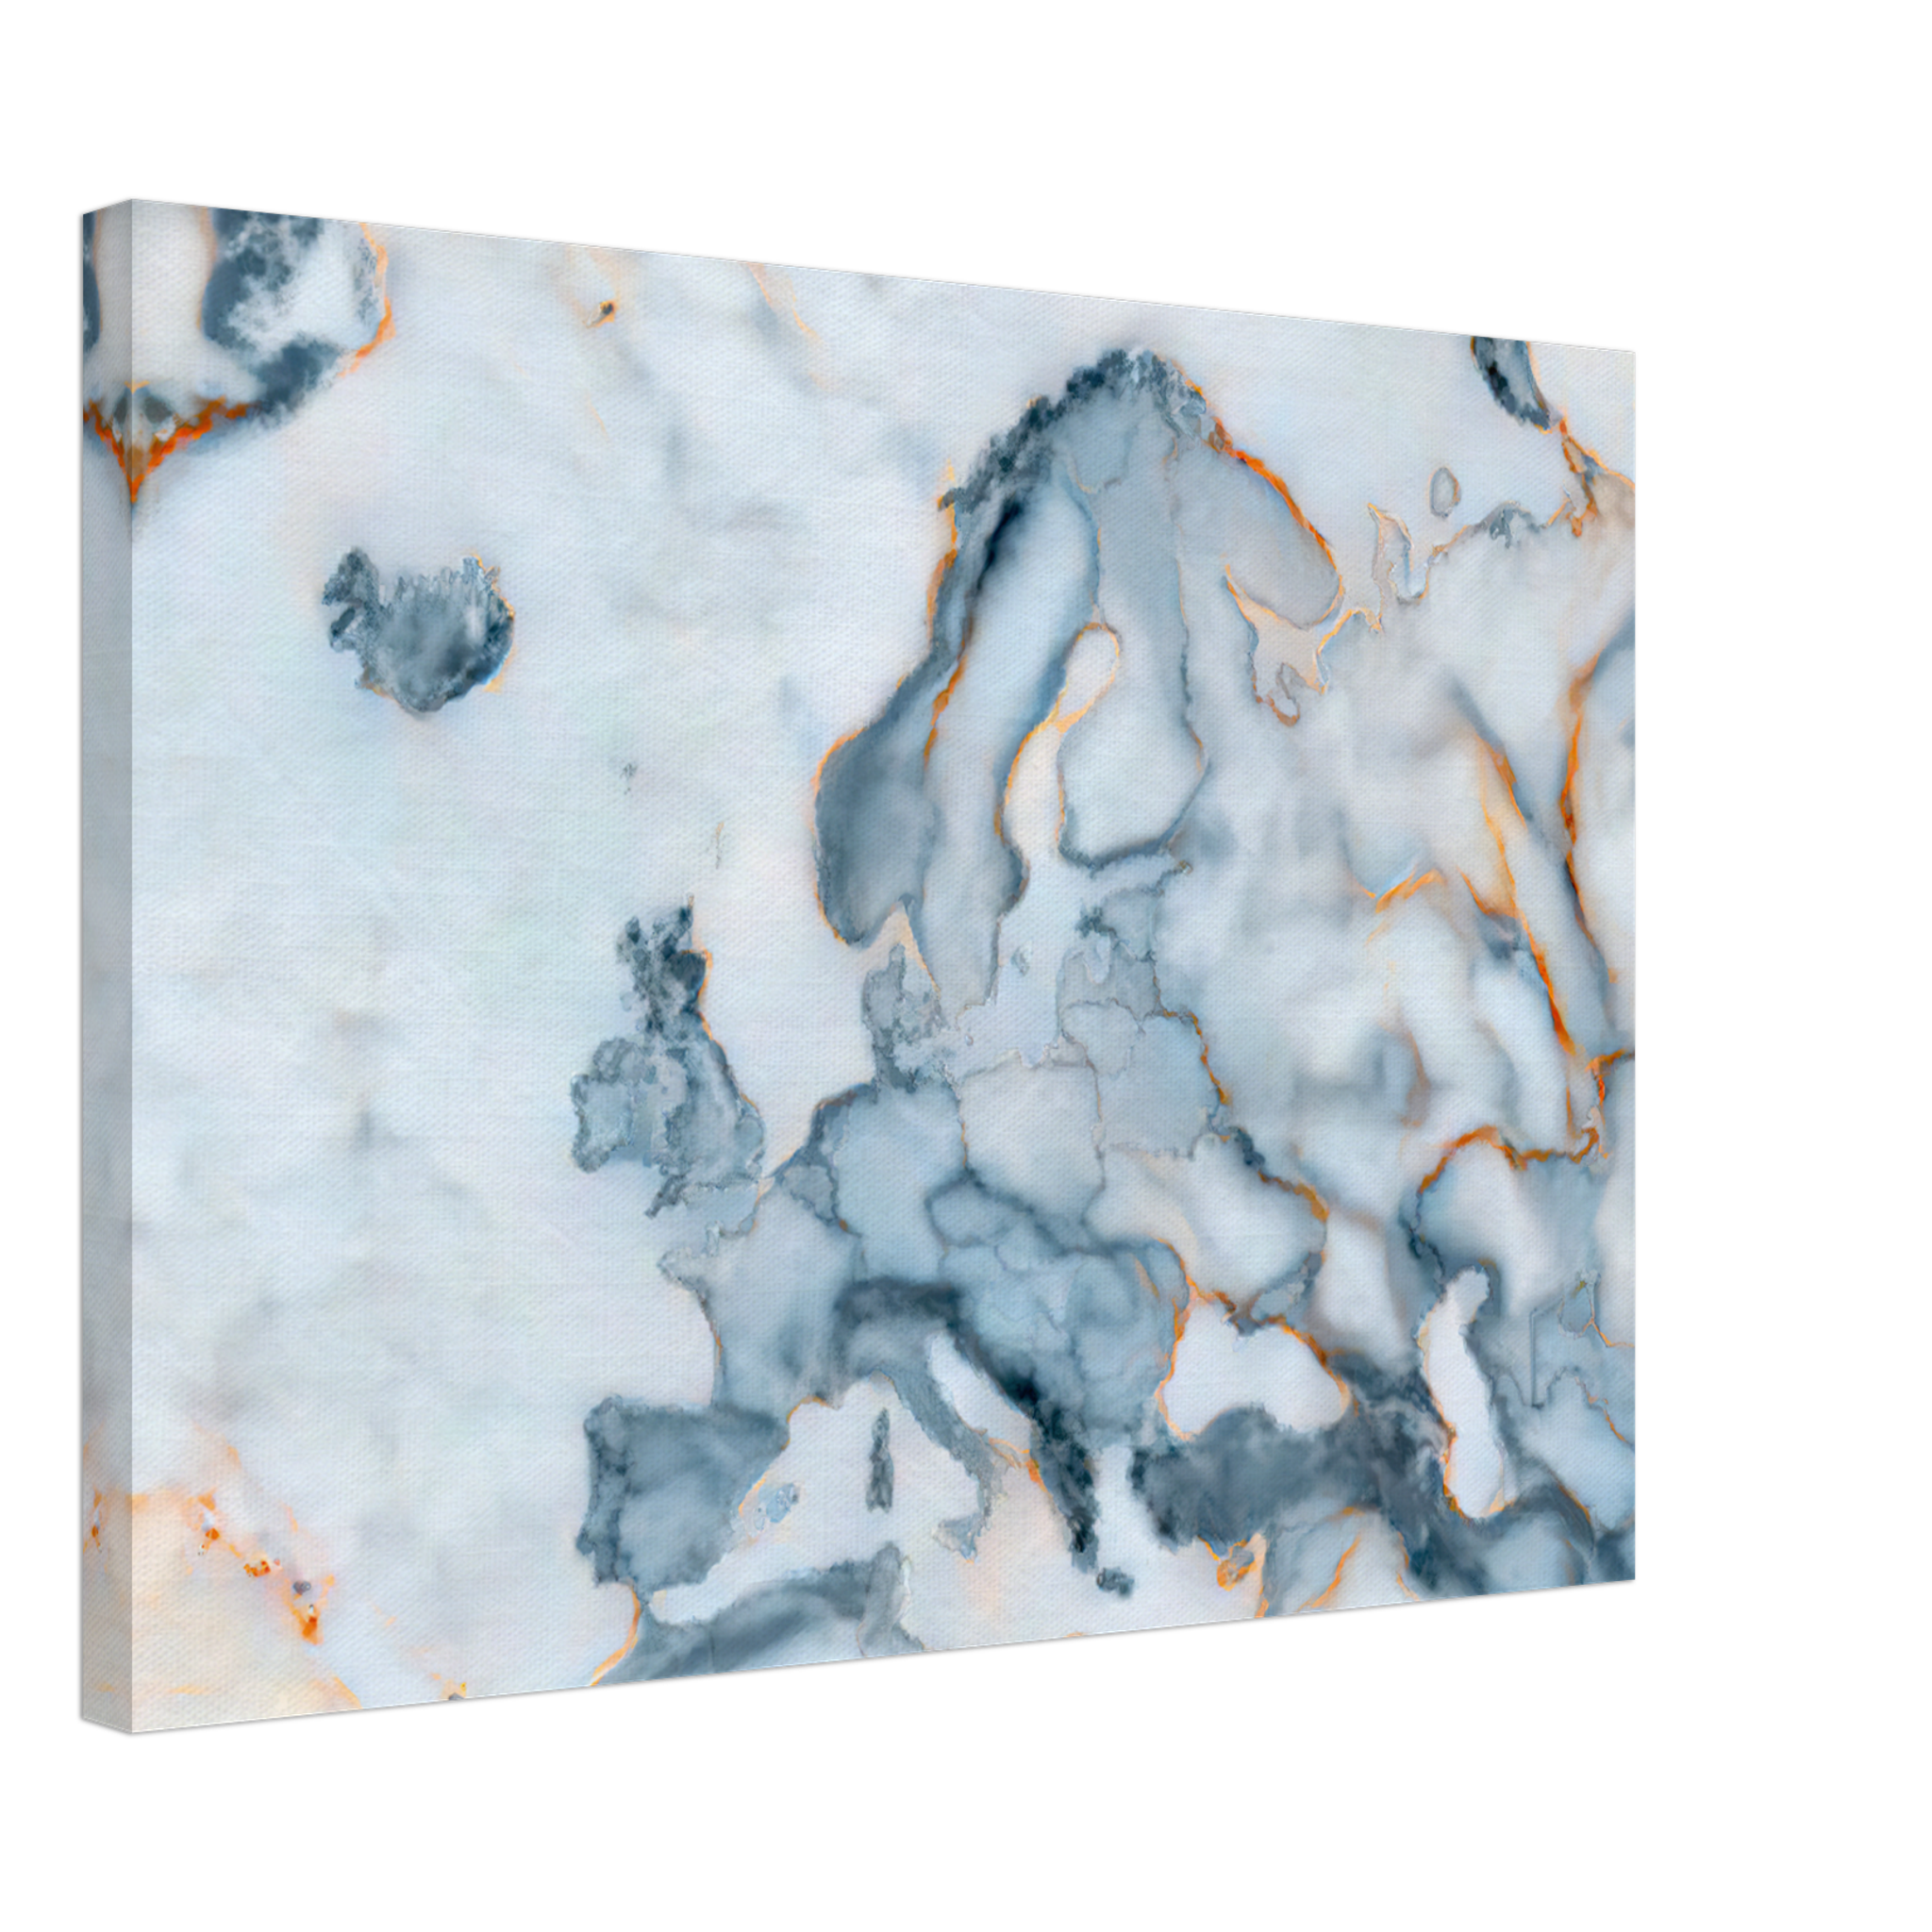 Europe Marble Map Canvas